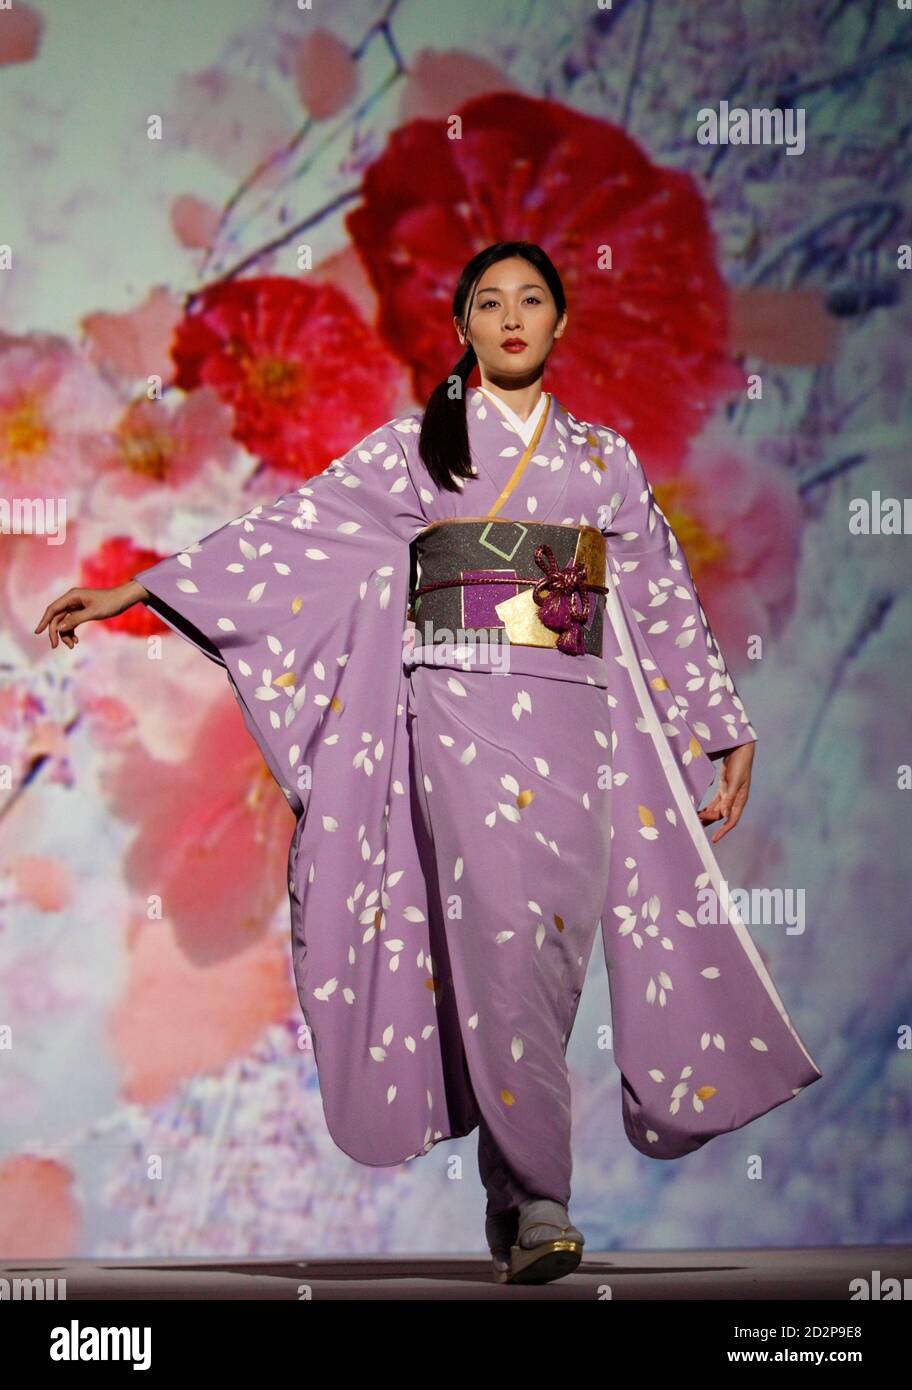 A model clad in a traditional kimono performs during the 'Embracing the  Japanese aesthetic' event in Tokyo November 5, 2009. REUTERS/Yuriko Nakao  (JAPAN FASHION Stock Photo - Alamy